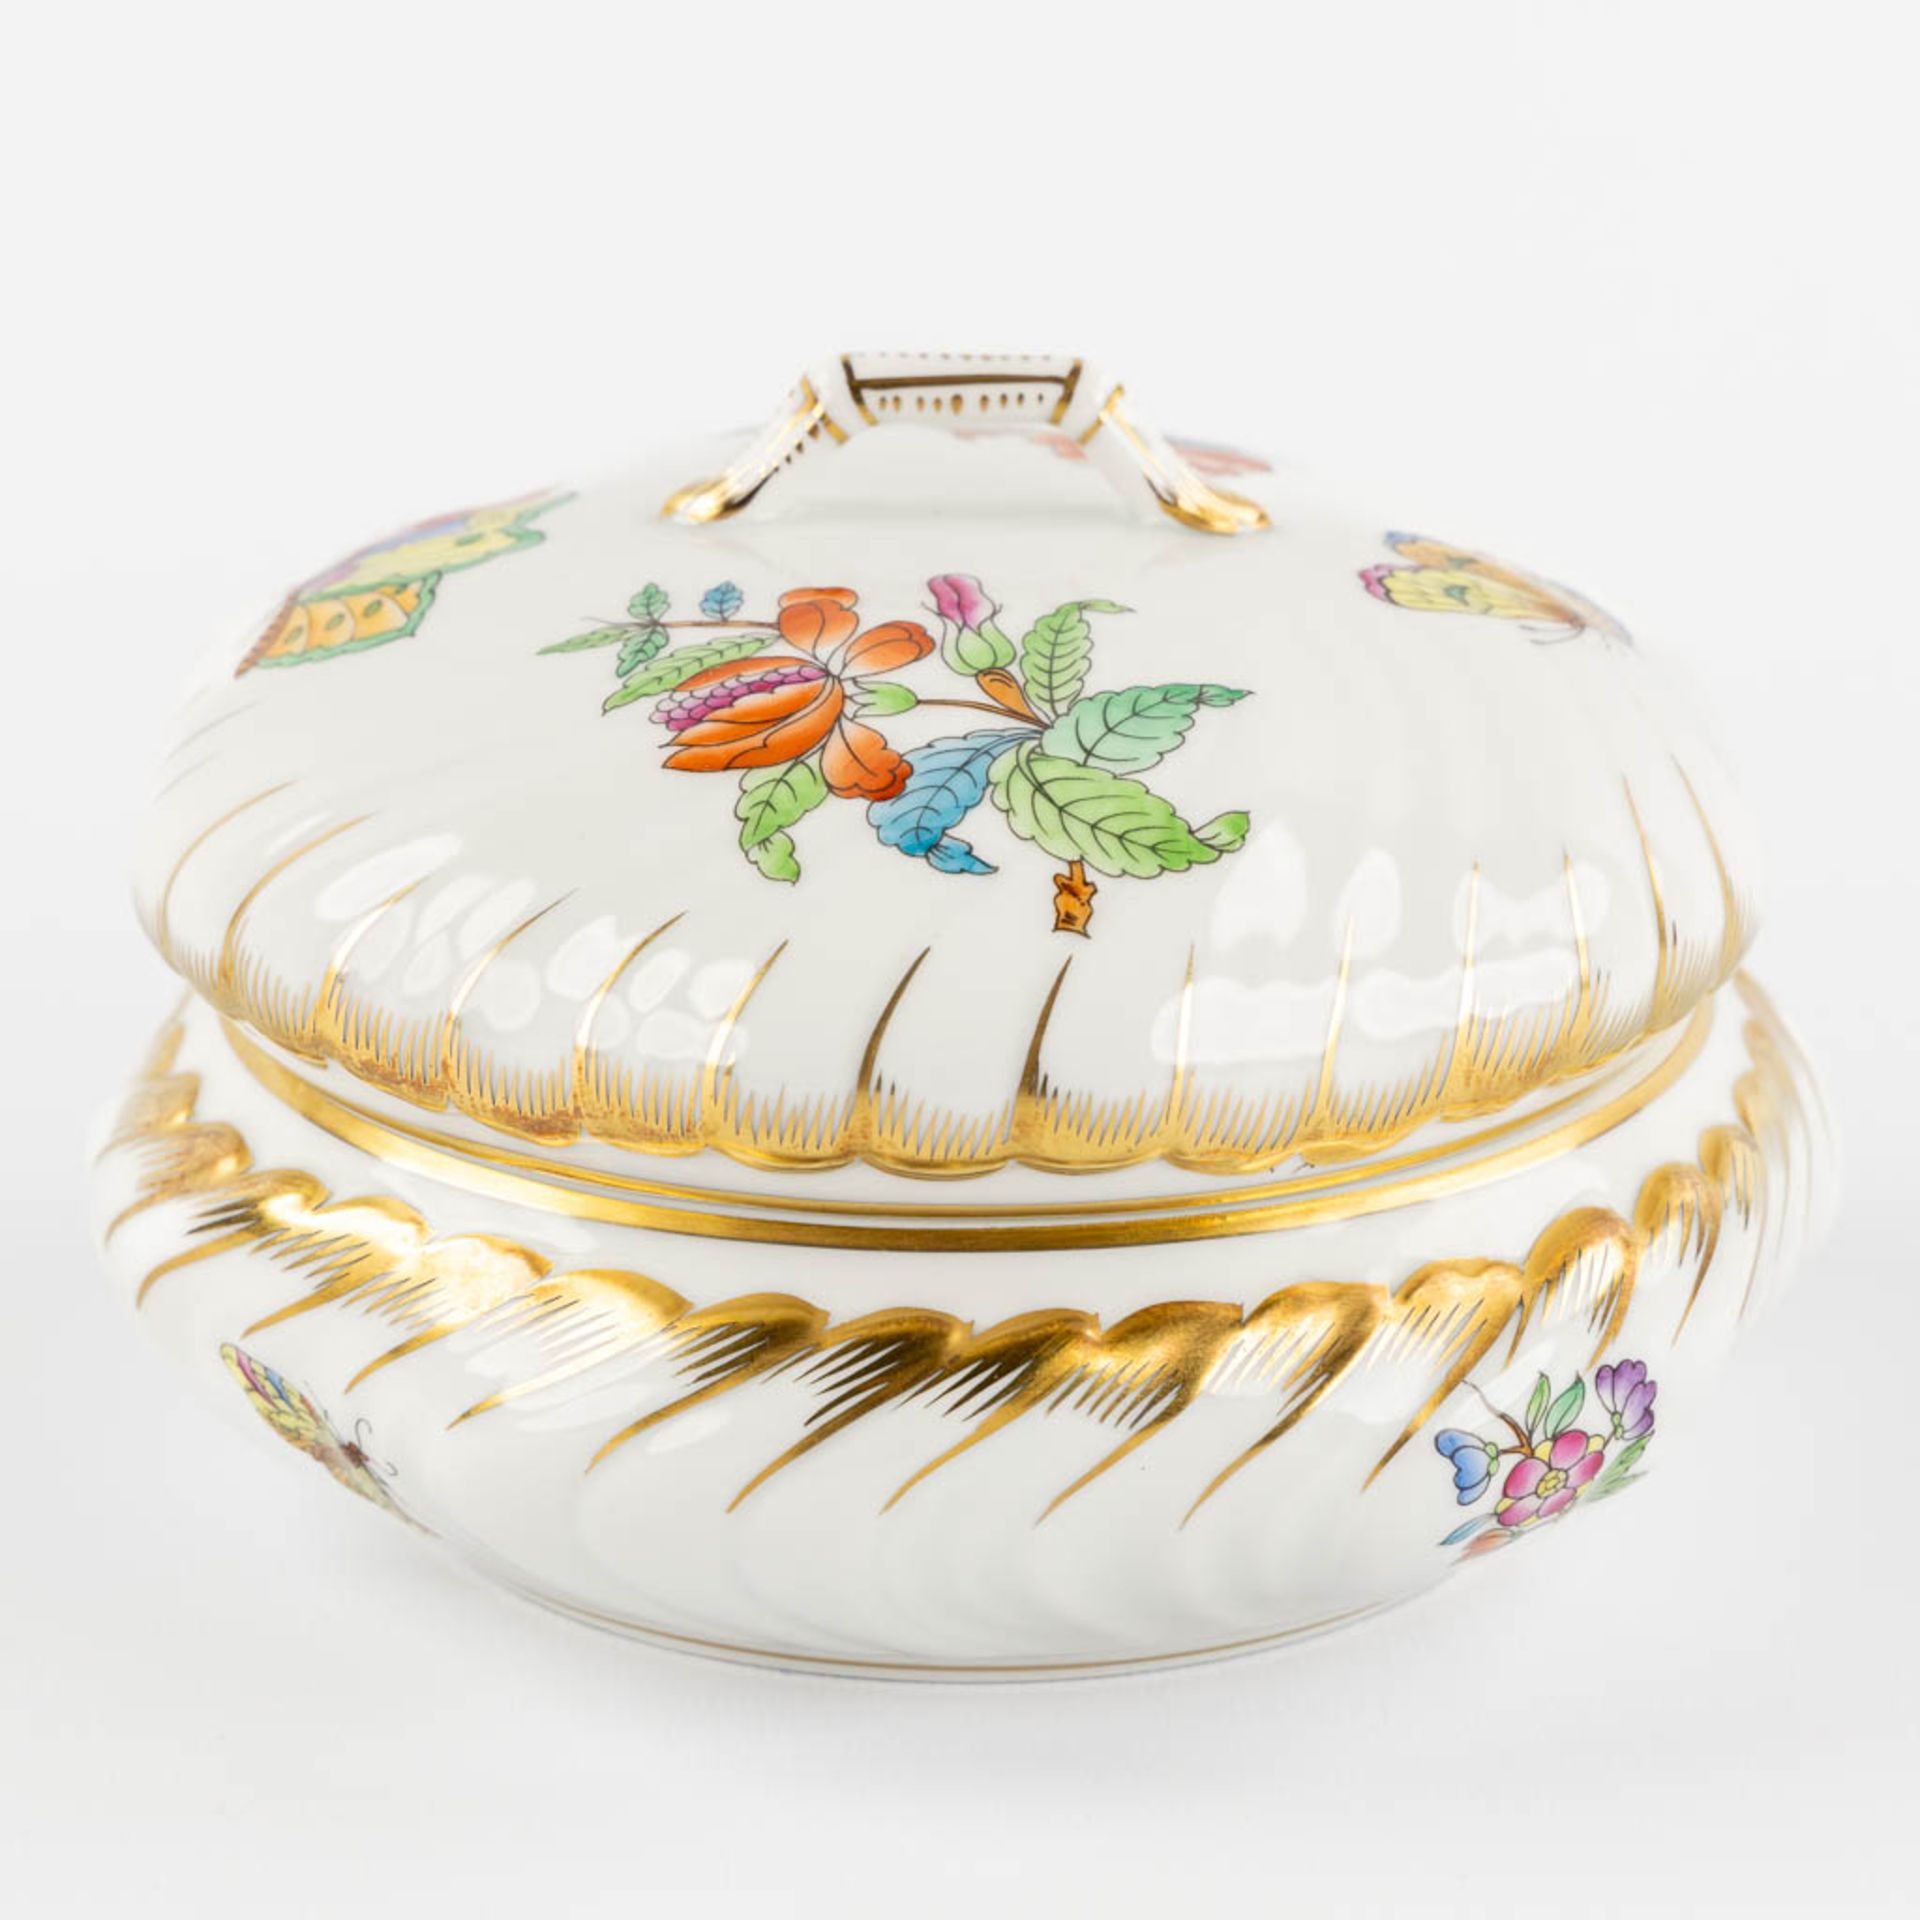 Herend, 7 pots with a lid, polychrome porcelain with a hand-painted decor. (H:10,5 x D:17 cm) - Image 3 of 12